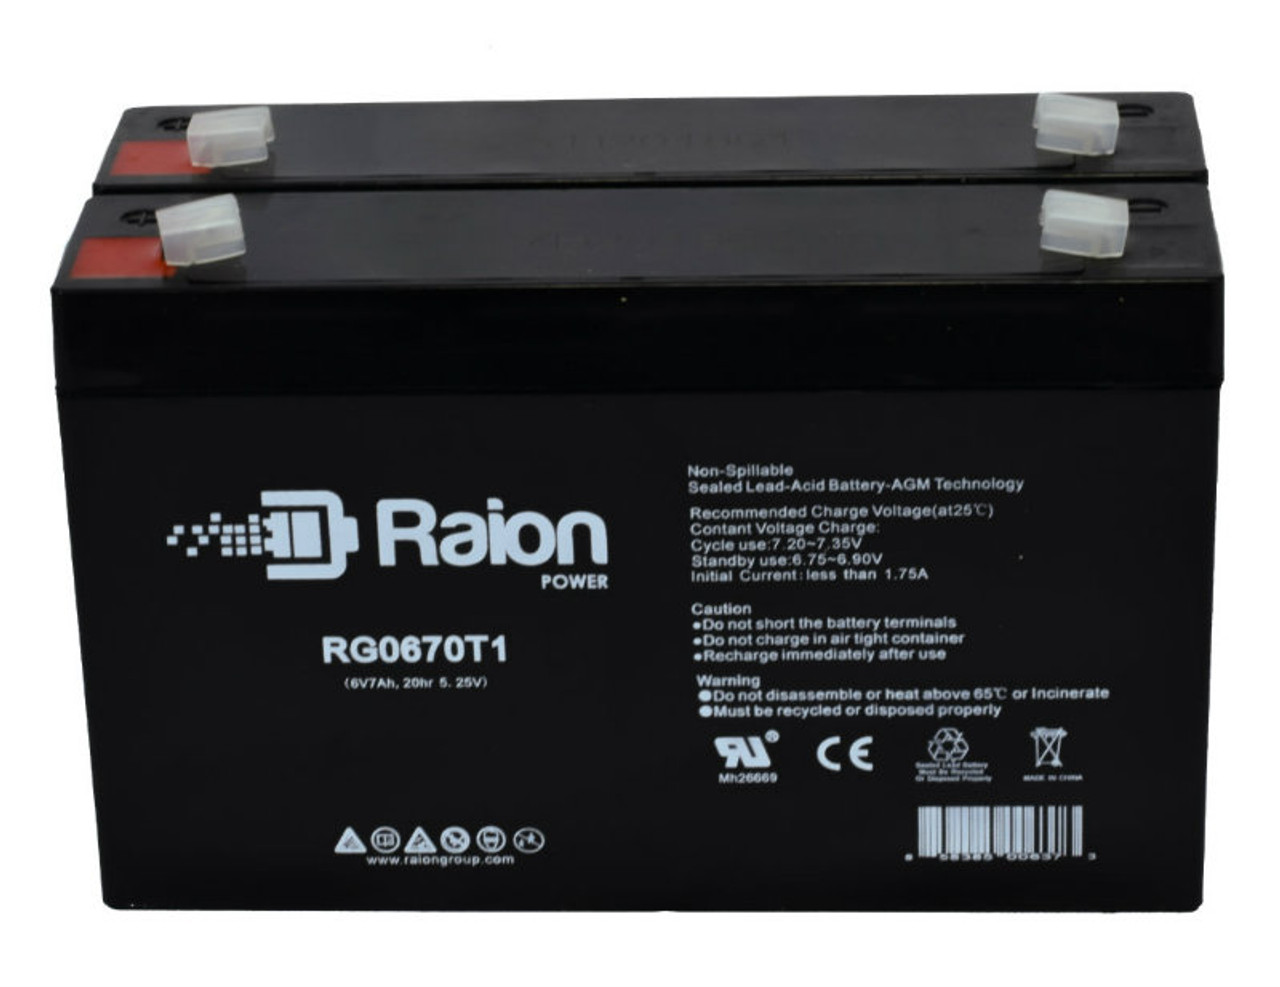 Raion Power RG0670T1 6V 7Ah Replacement Emergency Light Battery for Lithonia 6ELM2 - 2 Pack